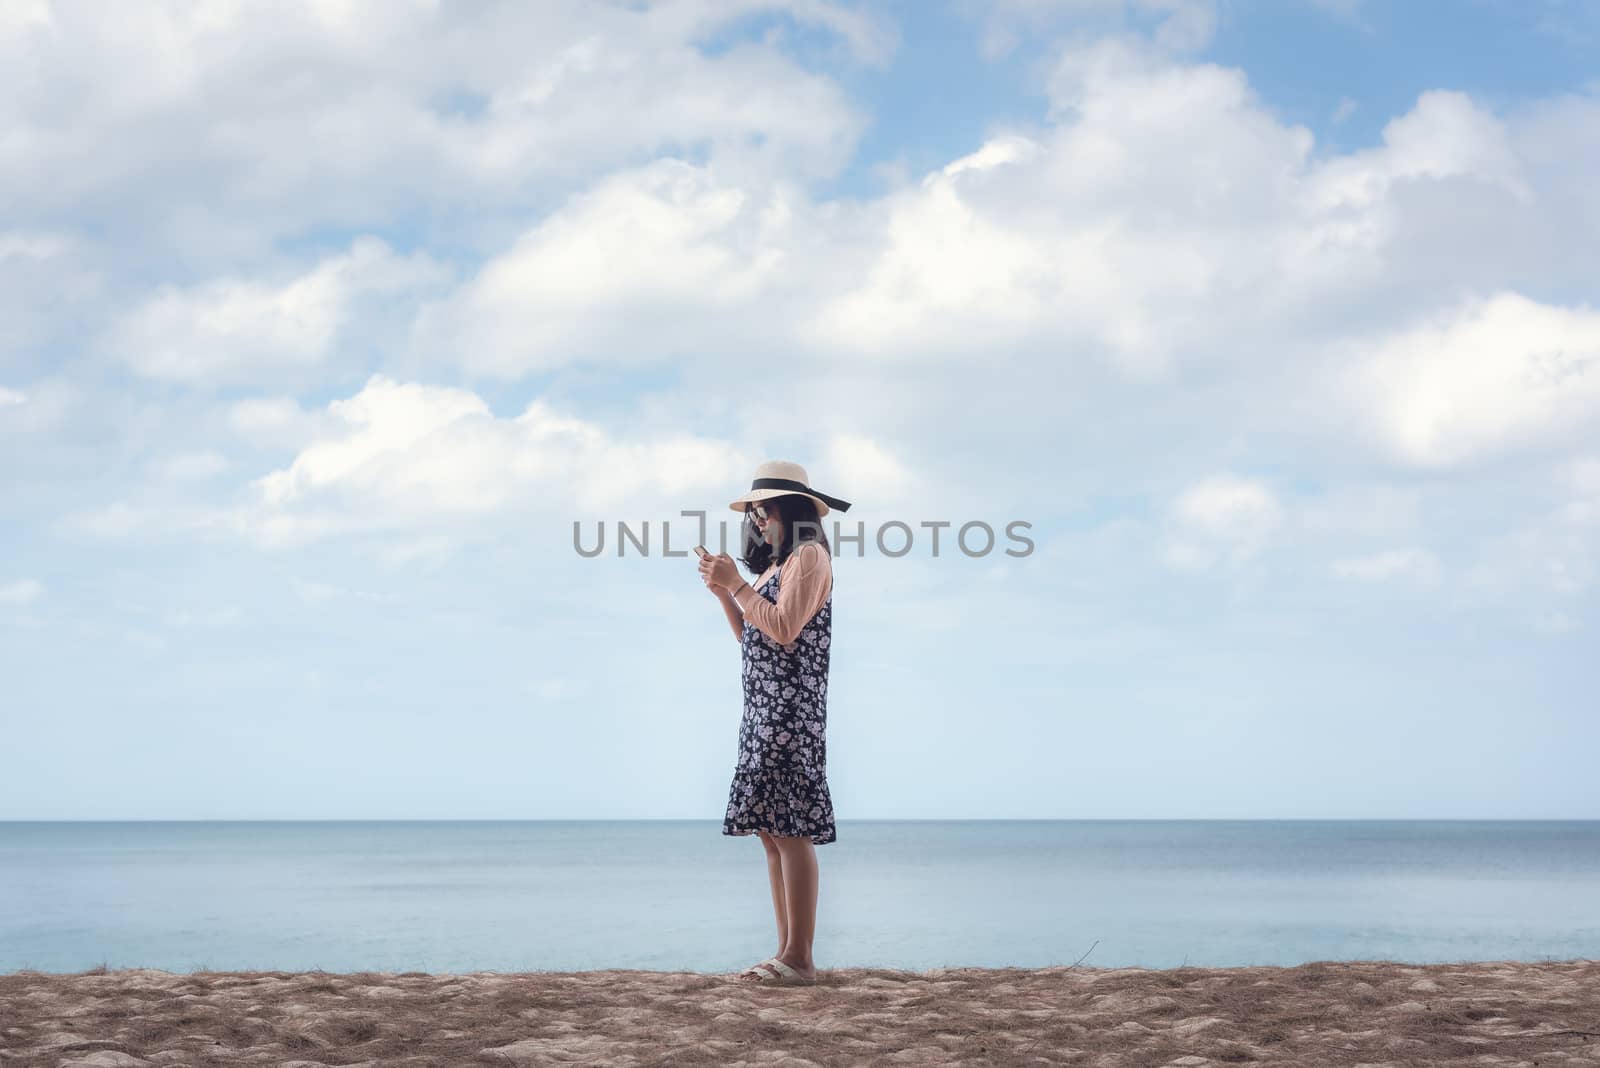 Portrait of Asian Woman is Using Mobile Phone Against Blue Sky and Sand Beach, Beautiful Woman is Having Fun and Enjoying With Her Phone While Summer Vacation on The Beach. Relaxation Lifestyles